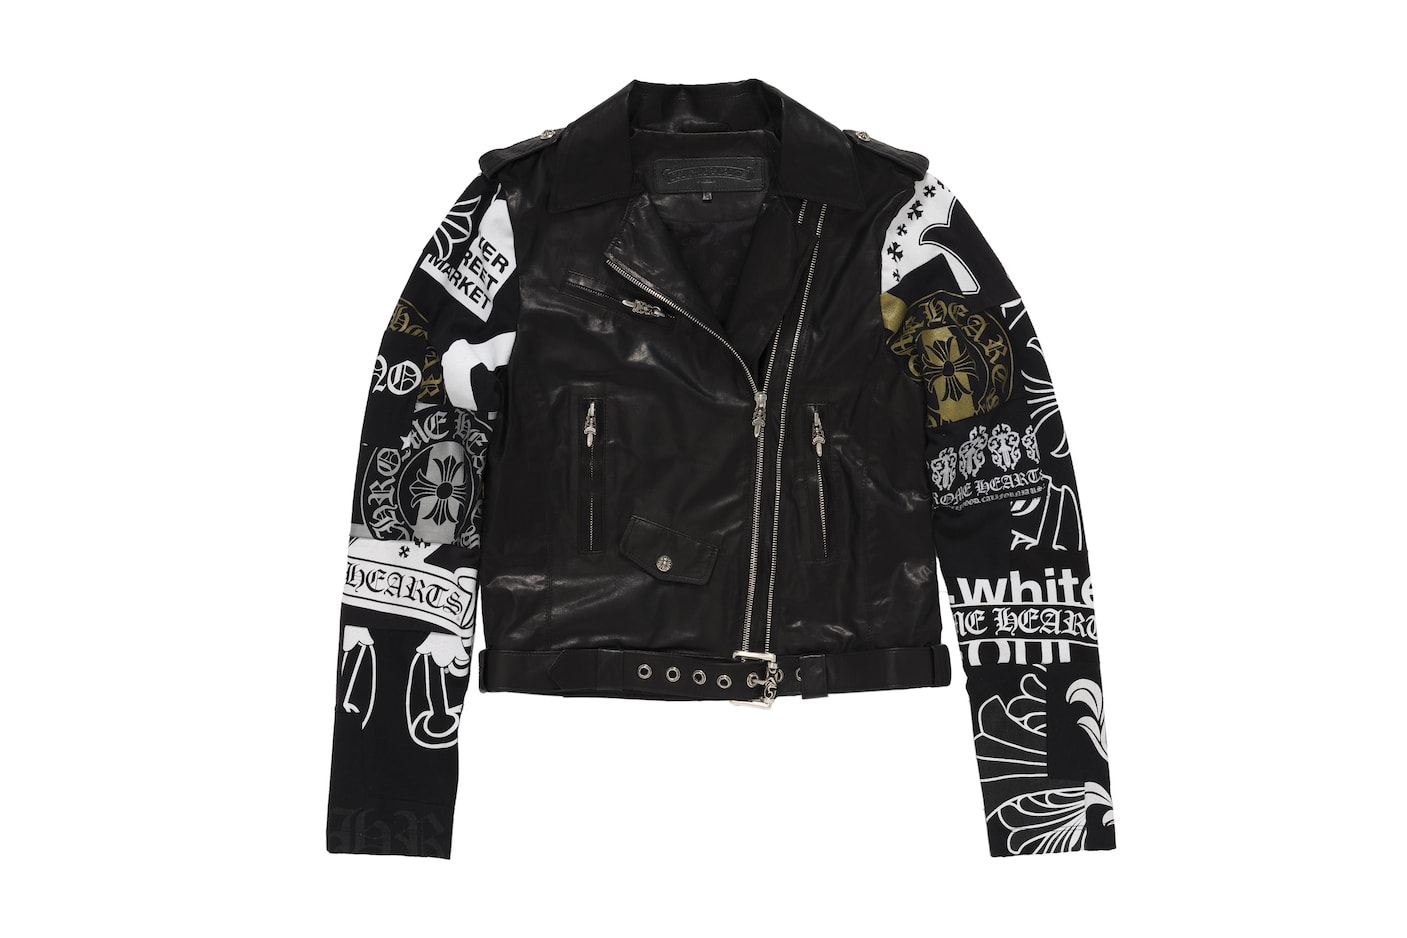 Chrome Hearts Dover Street Market Ginza 2016 Winter Leather Jackets Beanie